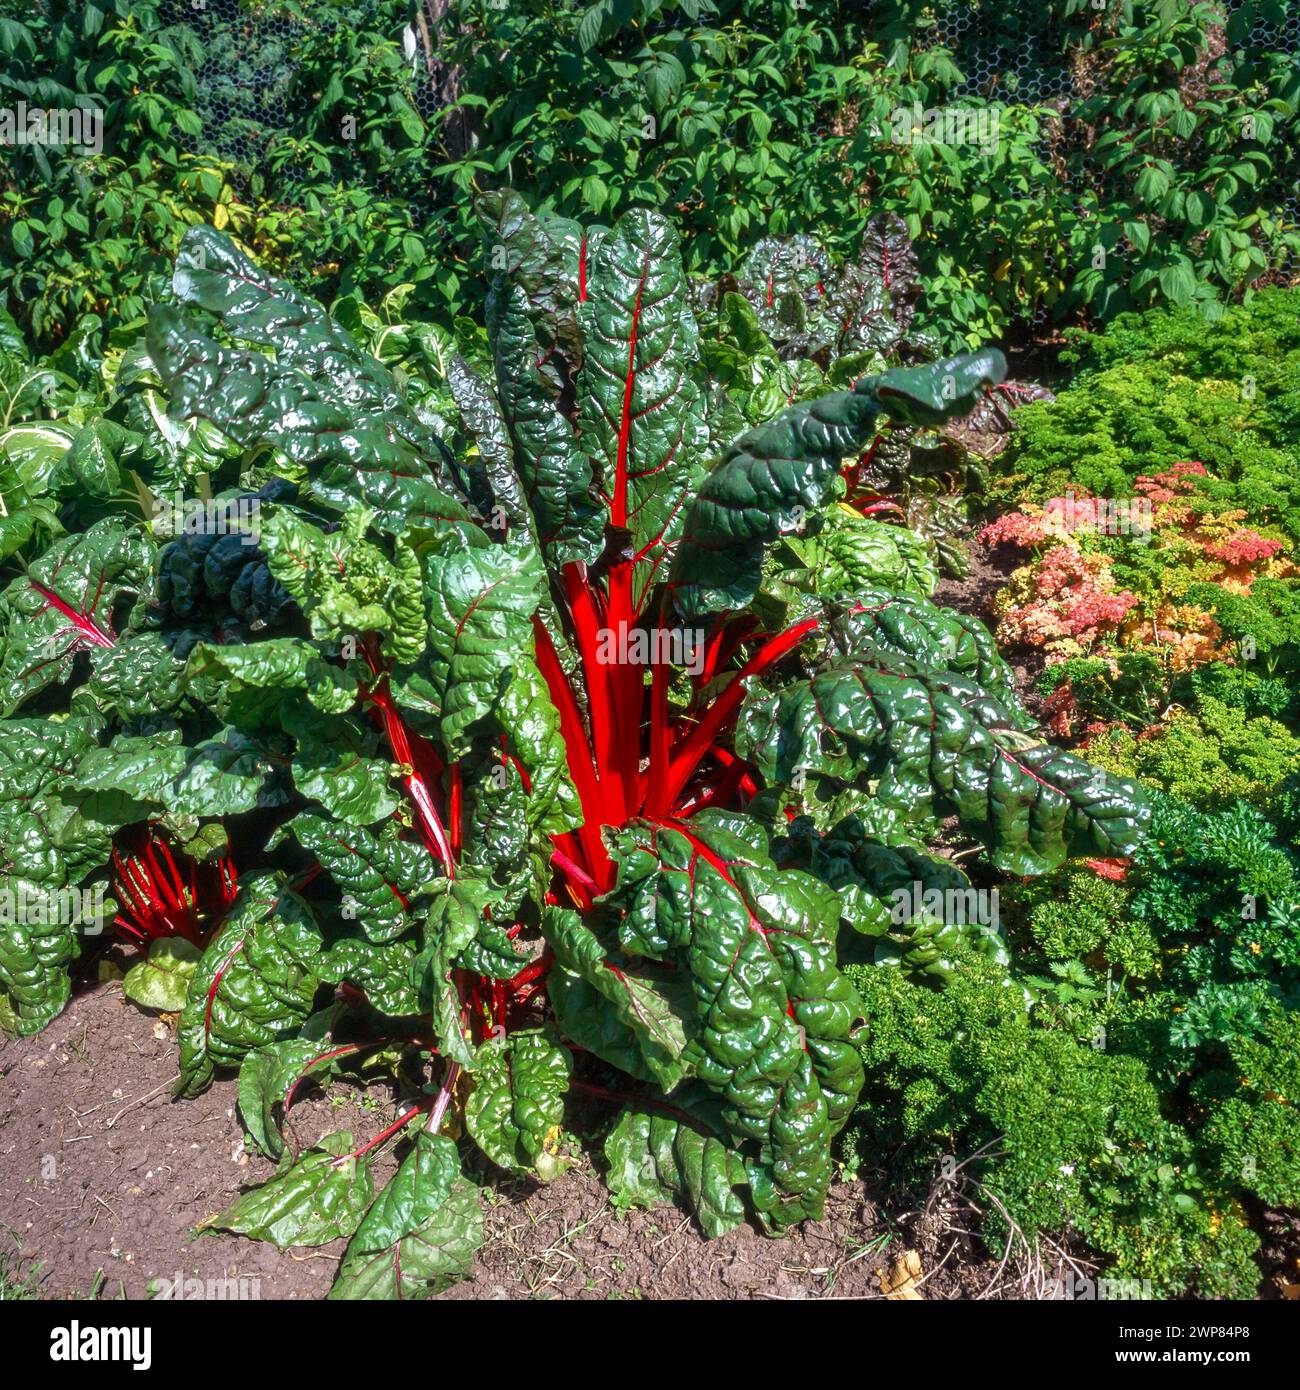 Swiss Chard 'Ruby red' with bright red stems and crinkly green leaves growing in English vegetable garden in August, England, UK Stock Photo